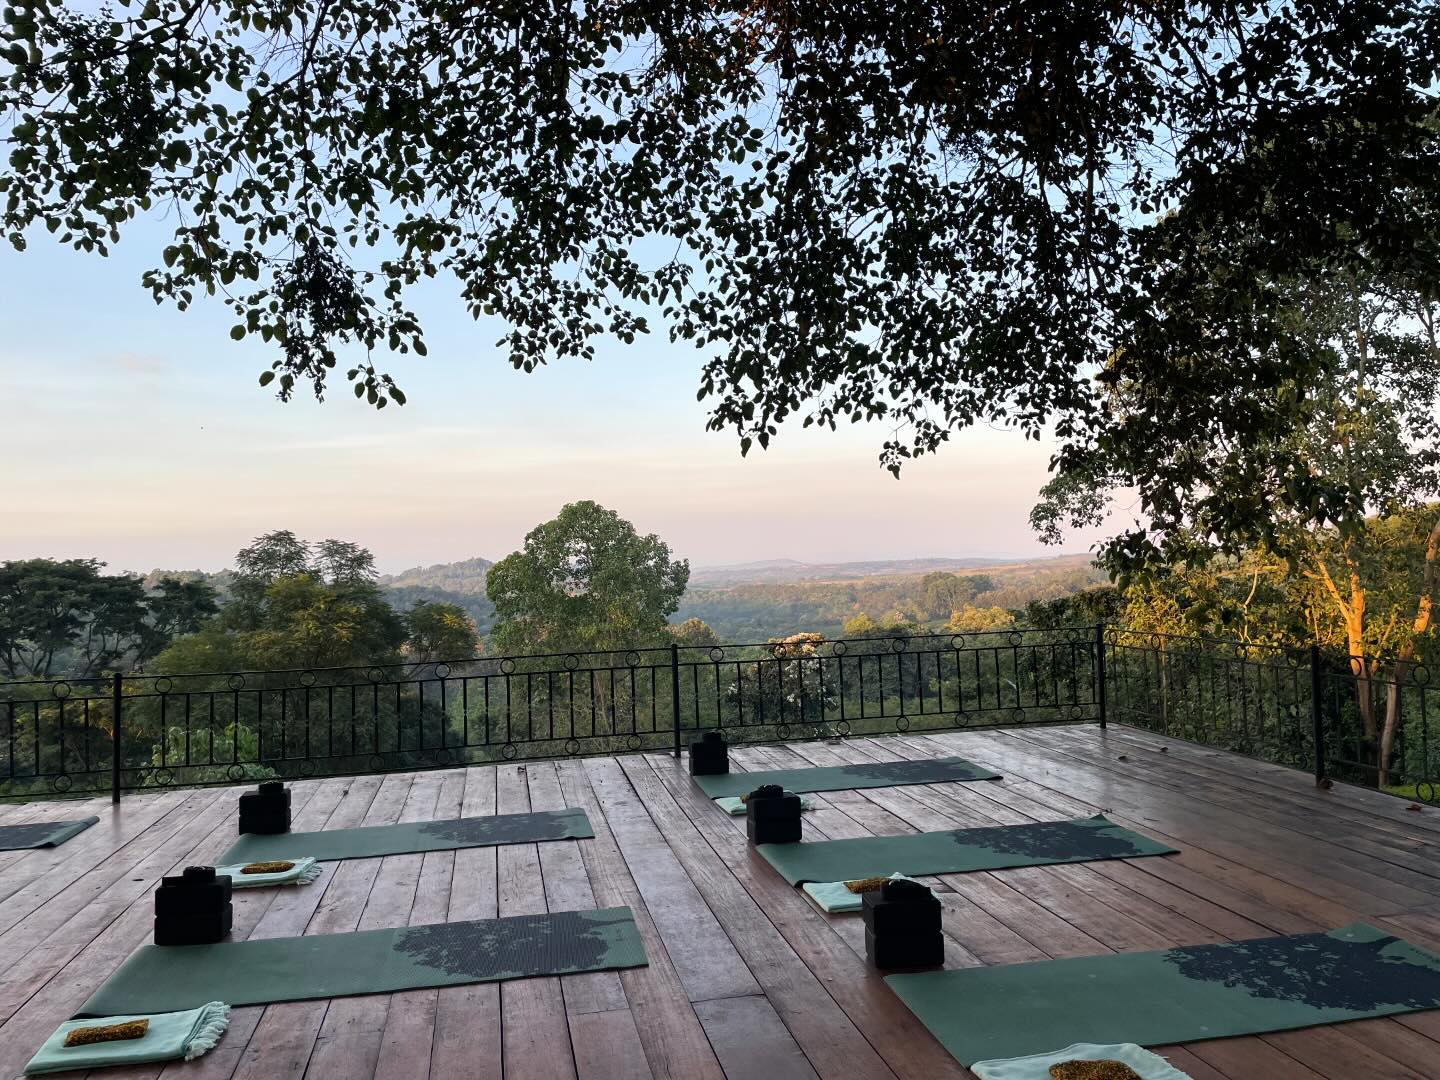 Family yoga session. Best way to start the day. Downward Dog with your nearest and dearest …… post safari stretch …. Ommmmm
#yoga #stretch #familytime #groupyoga #views #vast #nofilter #om